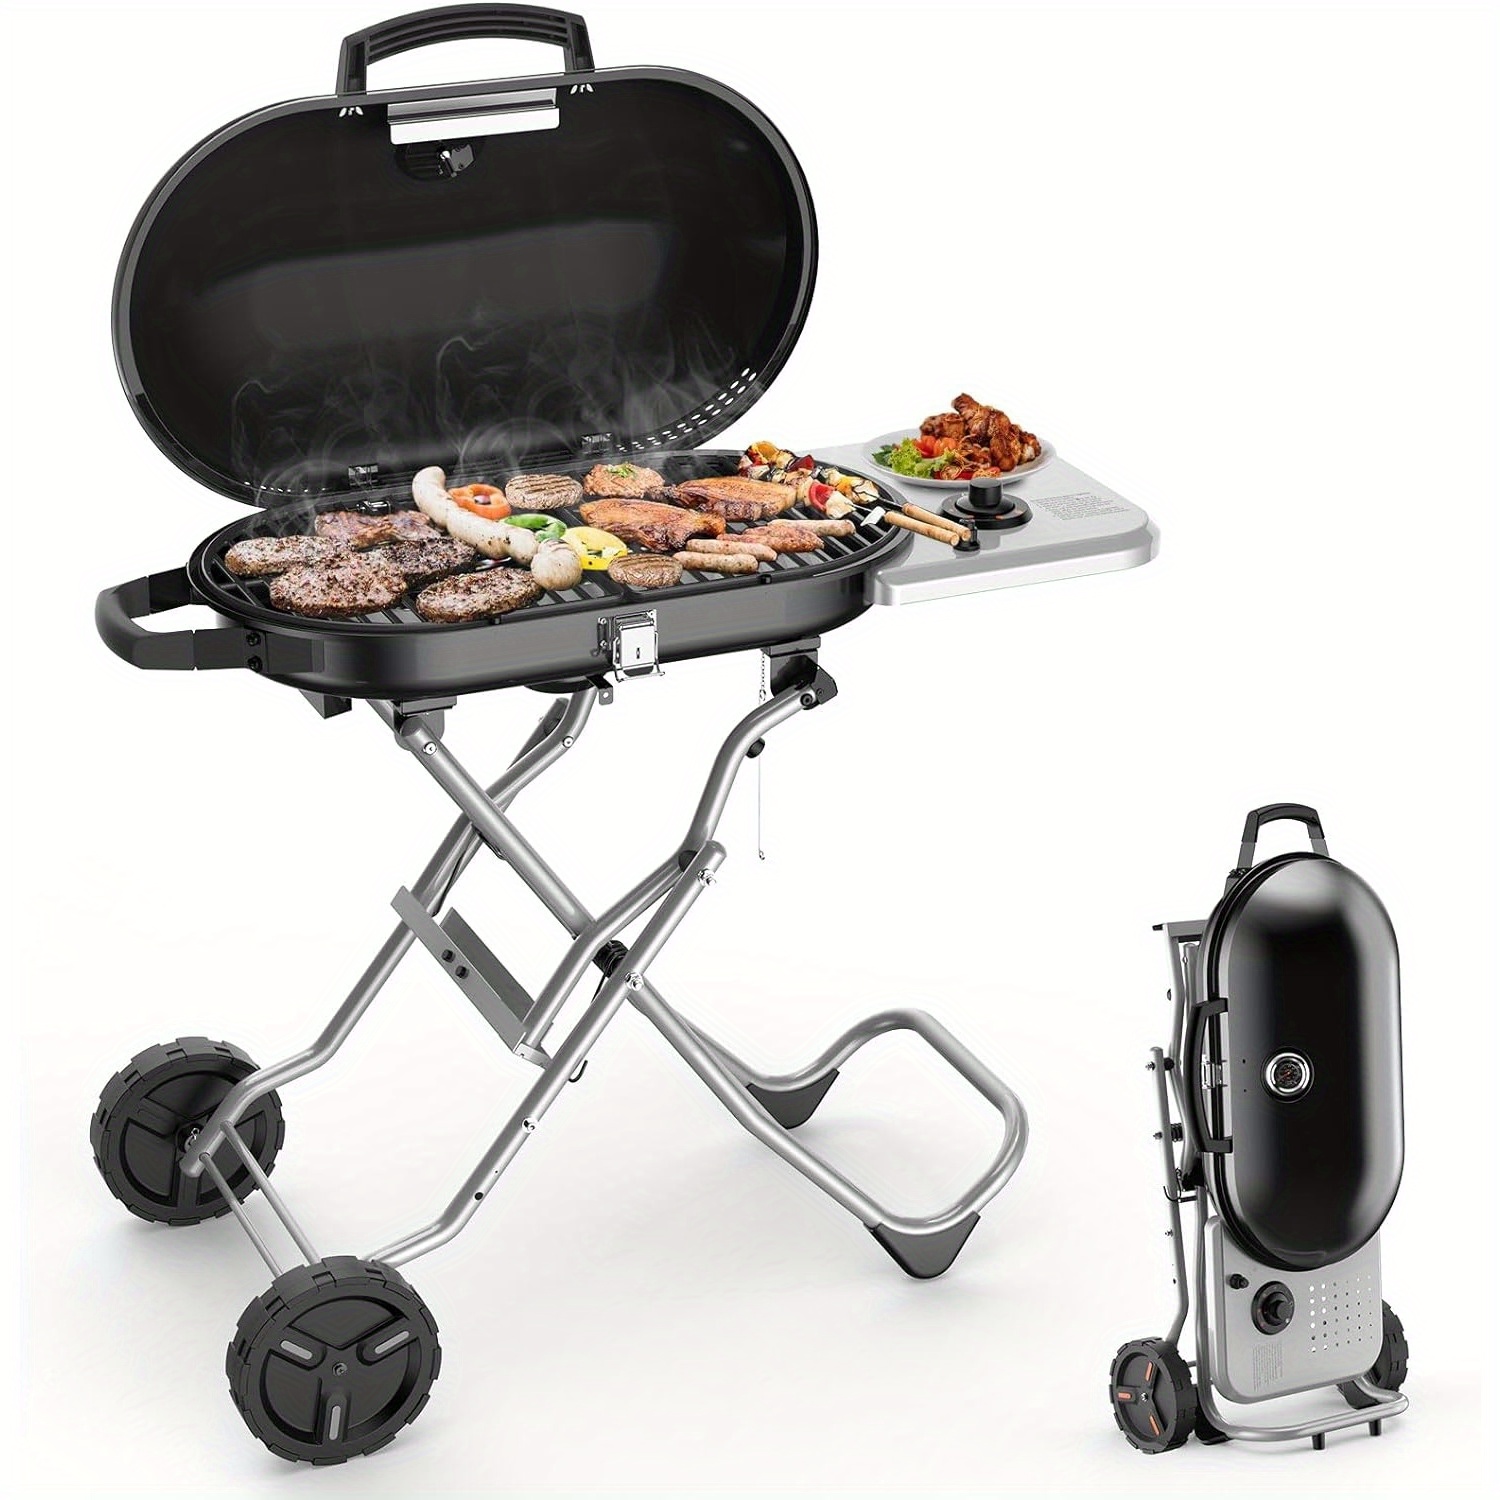 

Portable Propane Gas Grill, 15000btus, Bbq Gas Grill With 348 Sq Inch Large Cooking Areas, Sturdy Quick-fold Legs, Portable & Foldable Gas Grill For Outdoor Camping/tailgating/picnic, Black